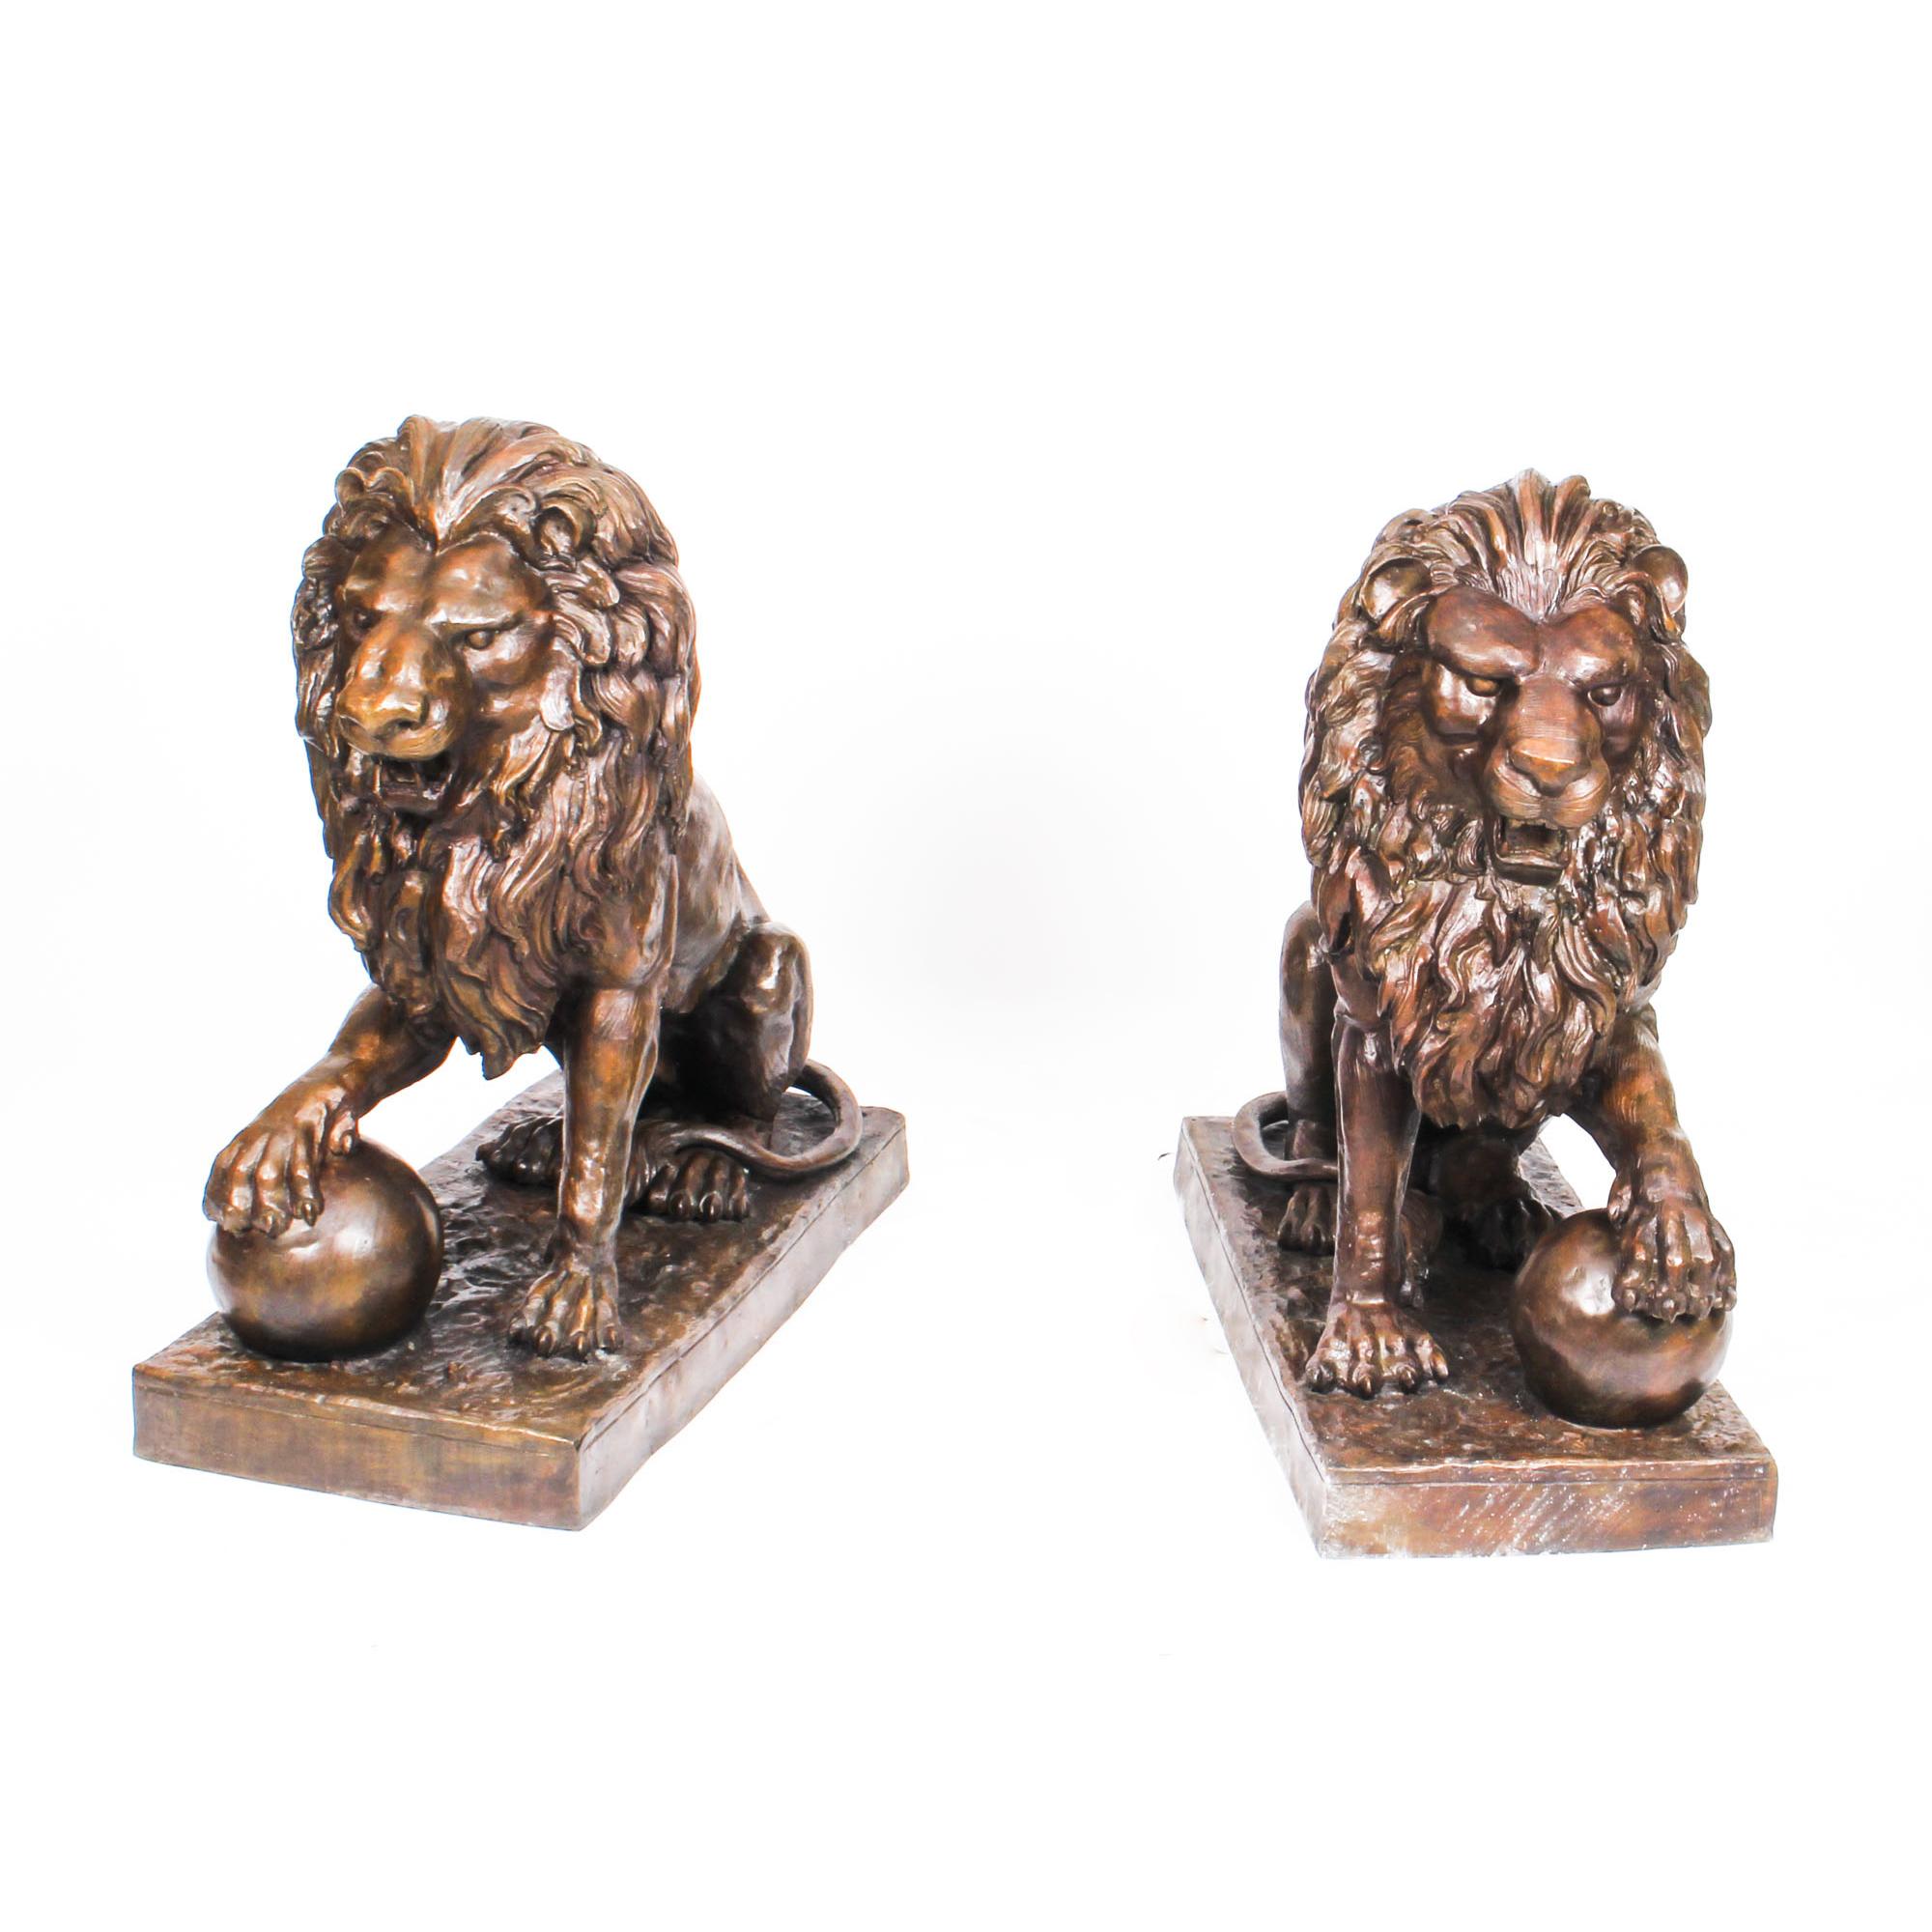 This is a historically interesting bronze sculpture of a pair of lions after the original Medici Lions placed at the Villa Medici, Rome. This pair dating from the second half of the 20th Century.

The lions are sitting on their haunches with one